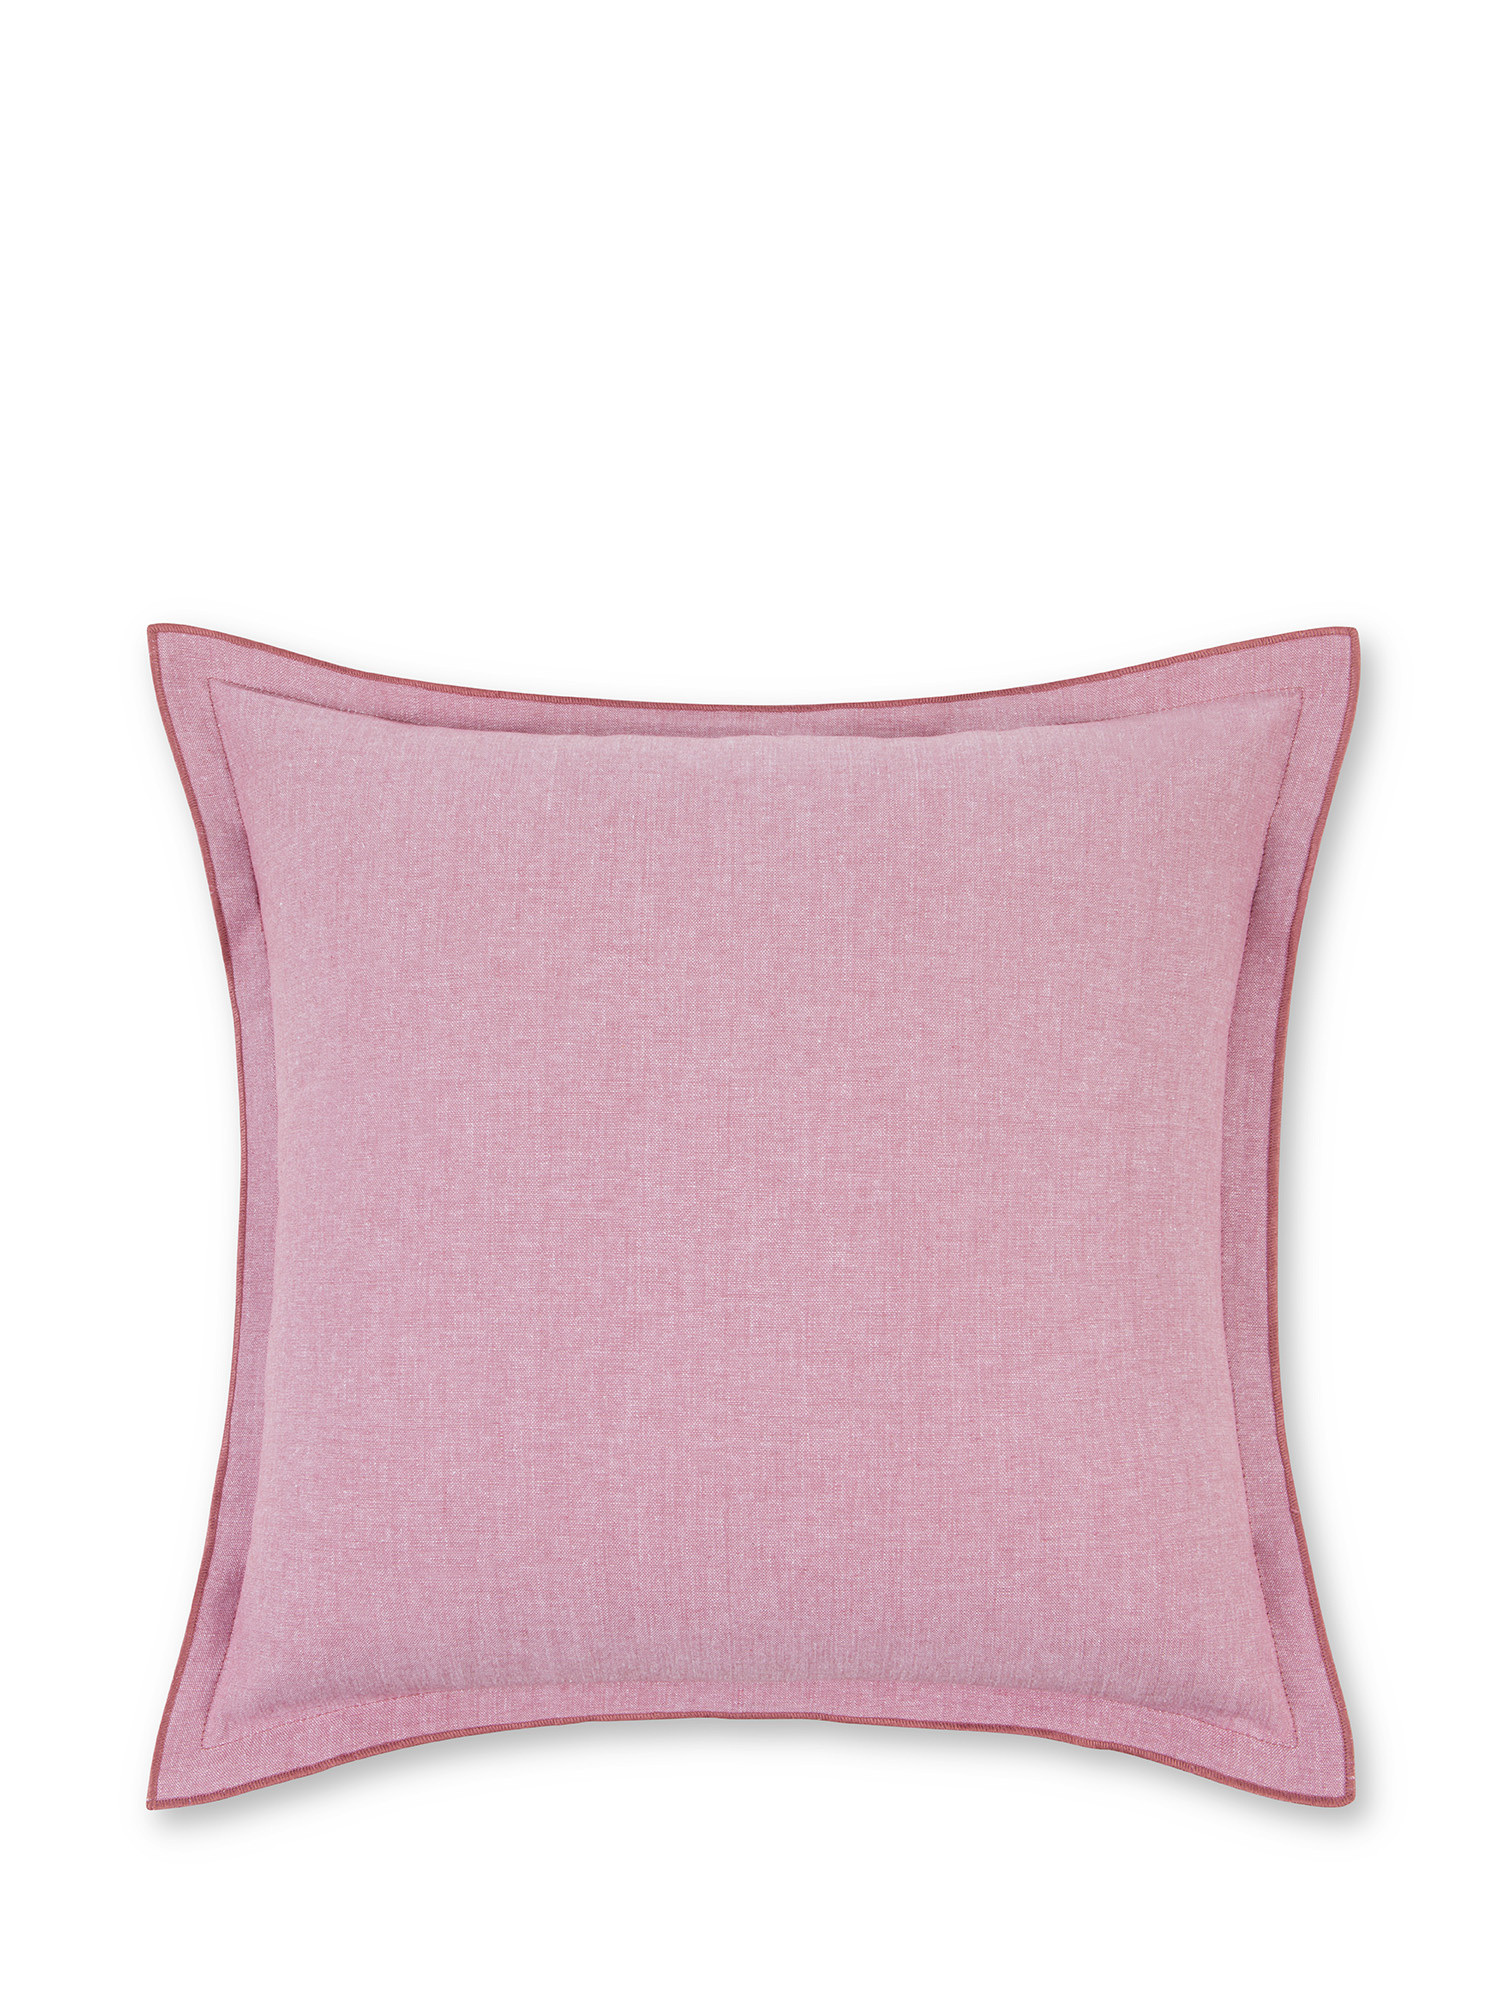 Chambray cotton cushion 45x45cm, Pink, large image number 0